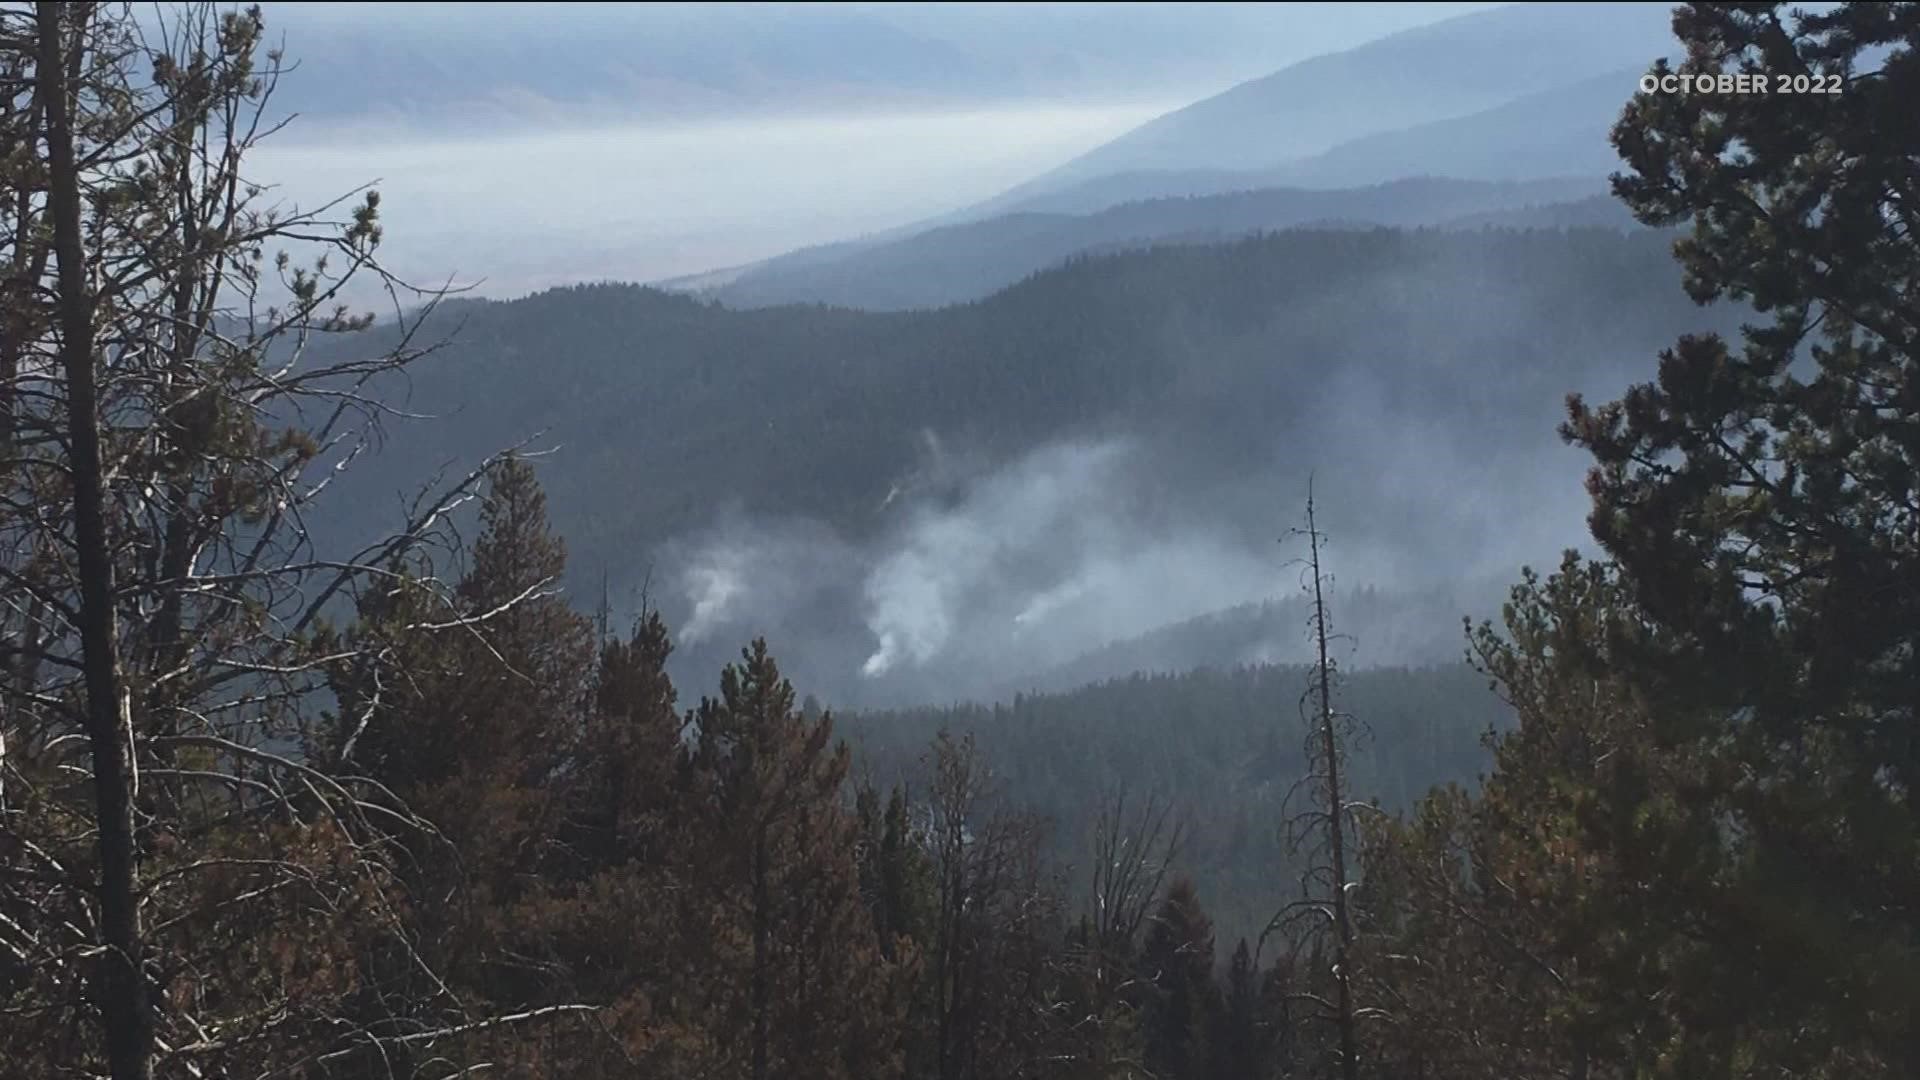 The Moose Fire northwest of Salmon has burned more than 130,000 acres since mid-July. Activity is now minimal, closures are lifted, but some hot spots remain.